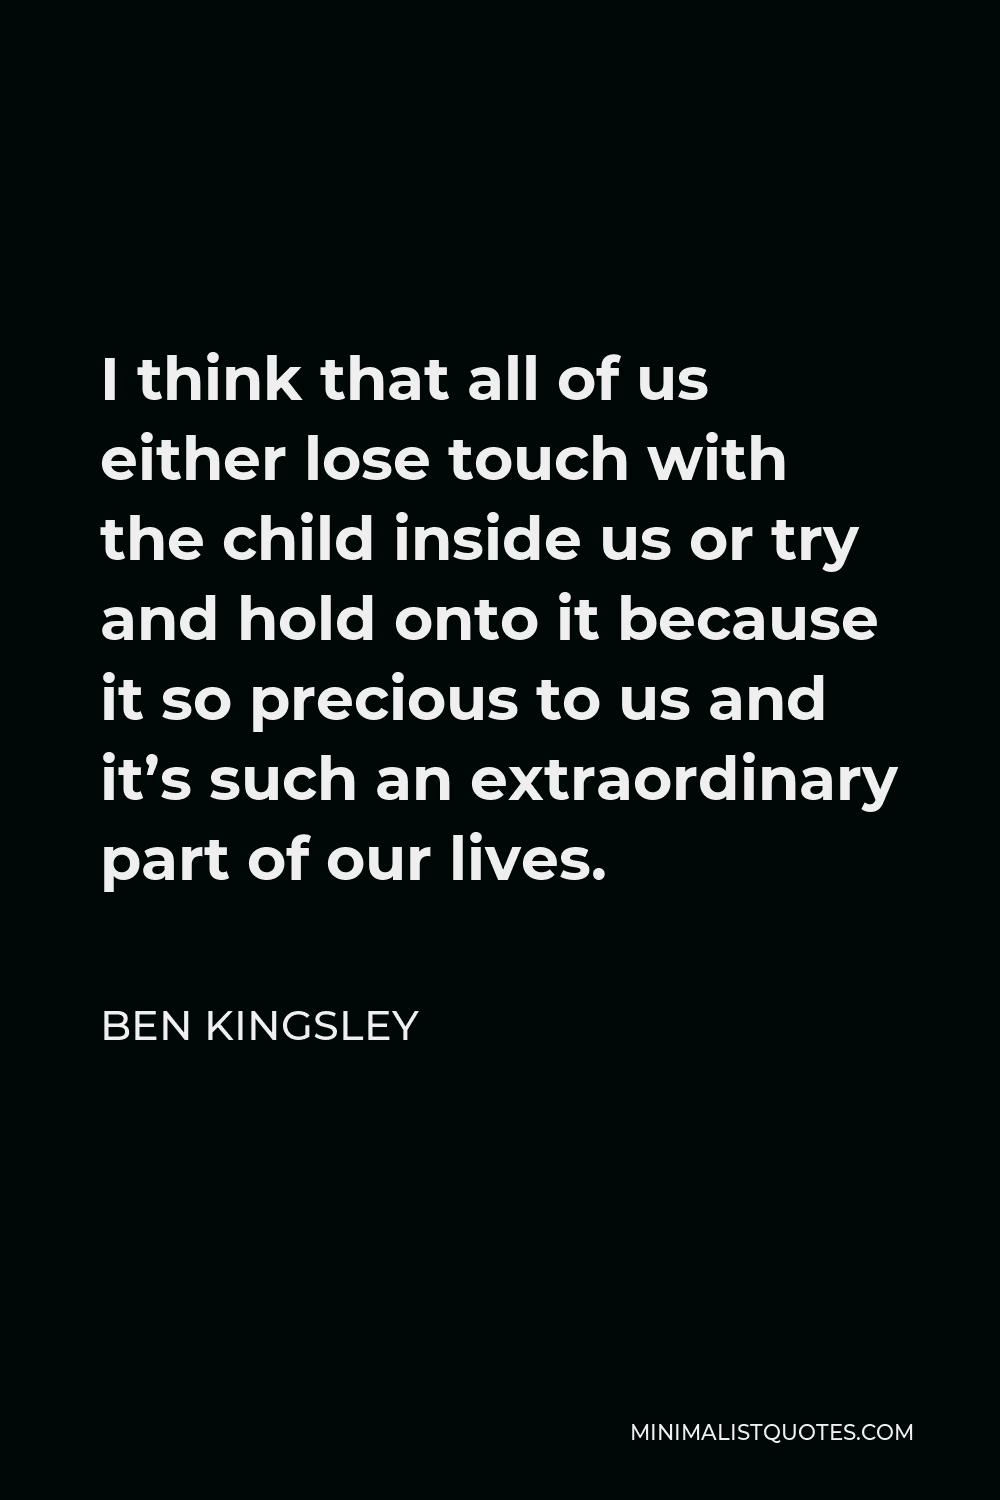 Ben Kingsley Quote - I think that all of us either lose touch with the child inside us or try and hold onto it because it so precious to us and it’s such an extraordinary part of our lives.